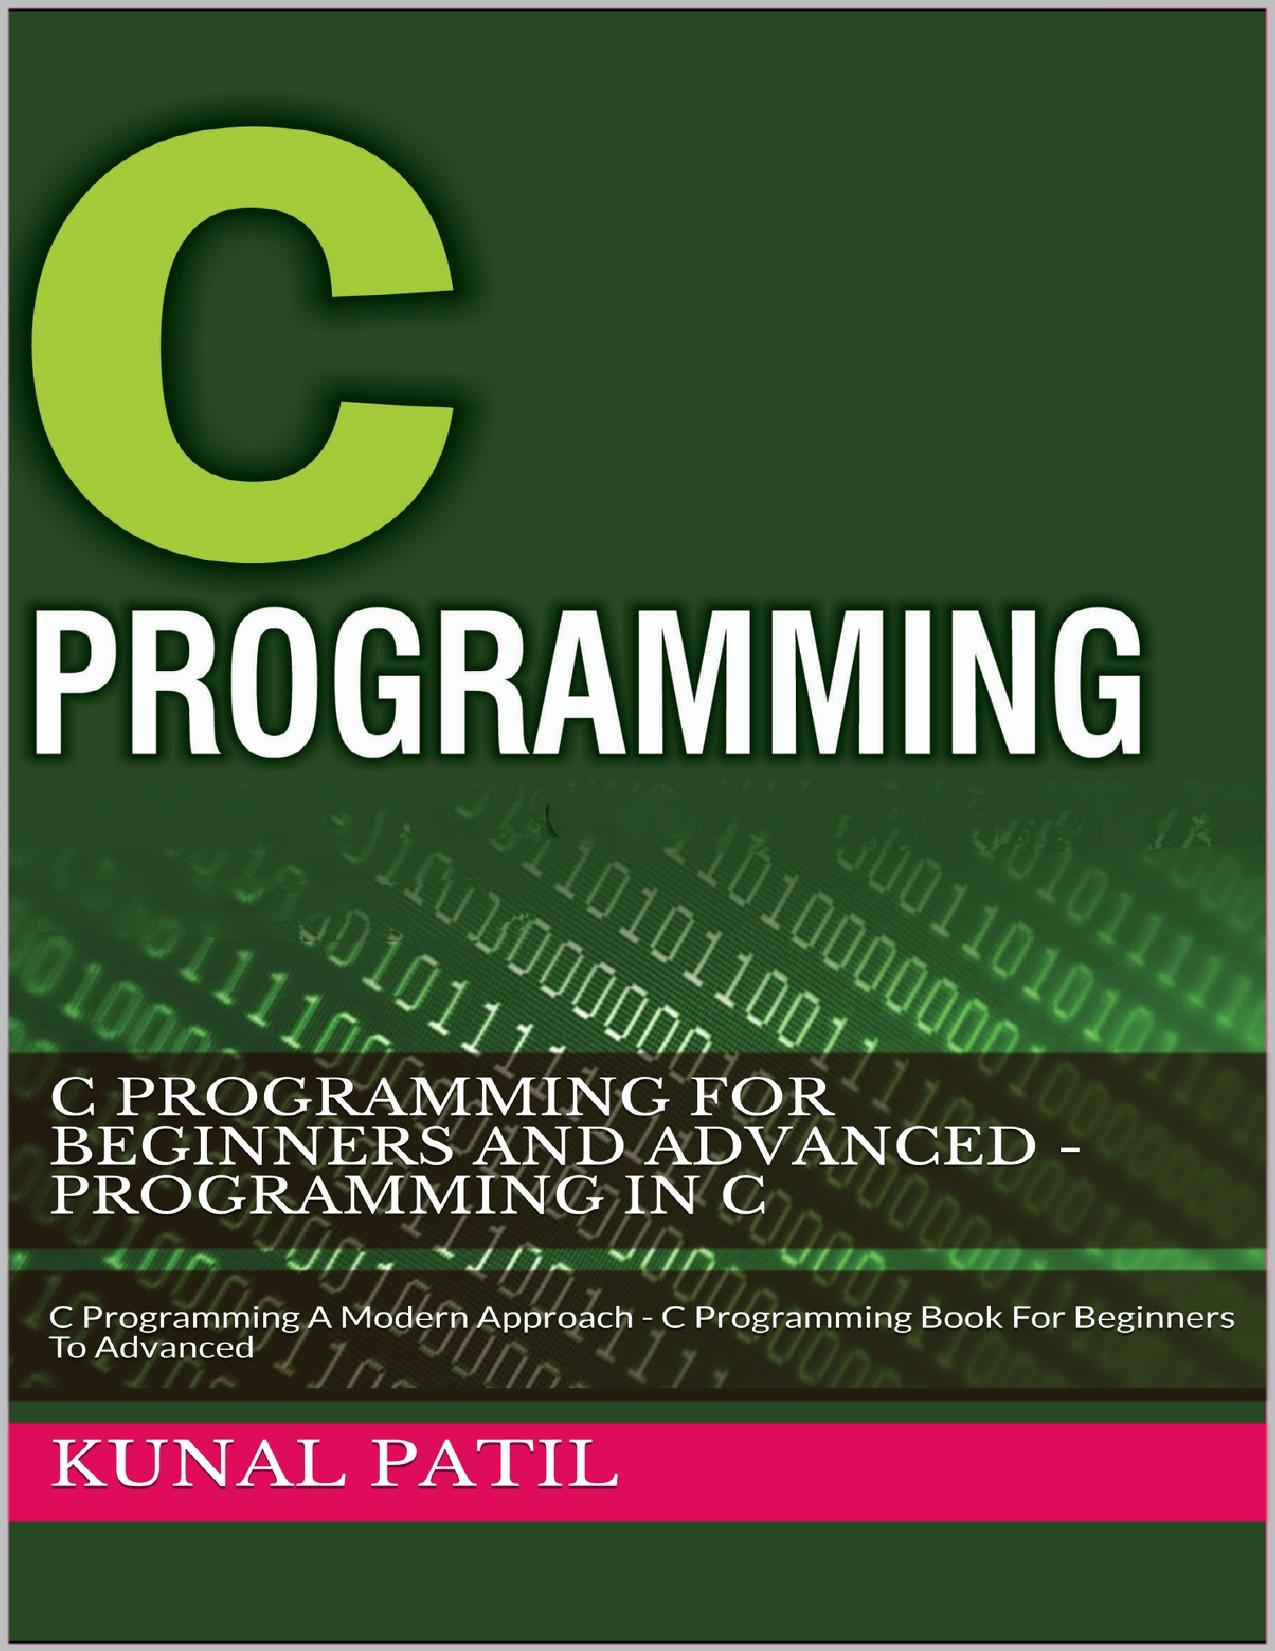 C Programming For Beginners And Advanced - Programming In C: C Programming A Modern Approach - C Programming Book For Beginners To Advanced by Patil Kunal